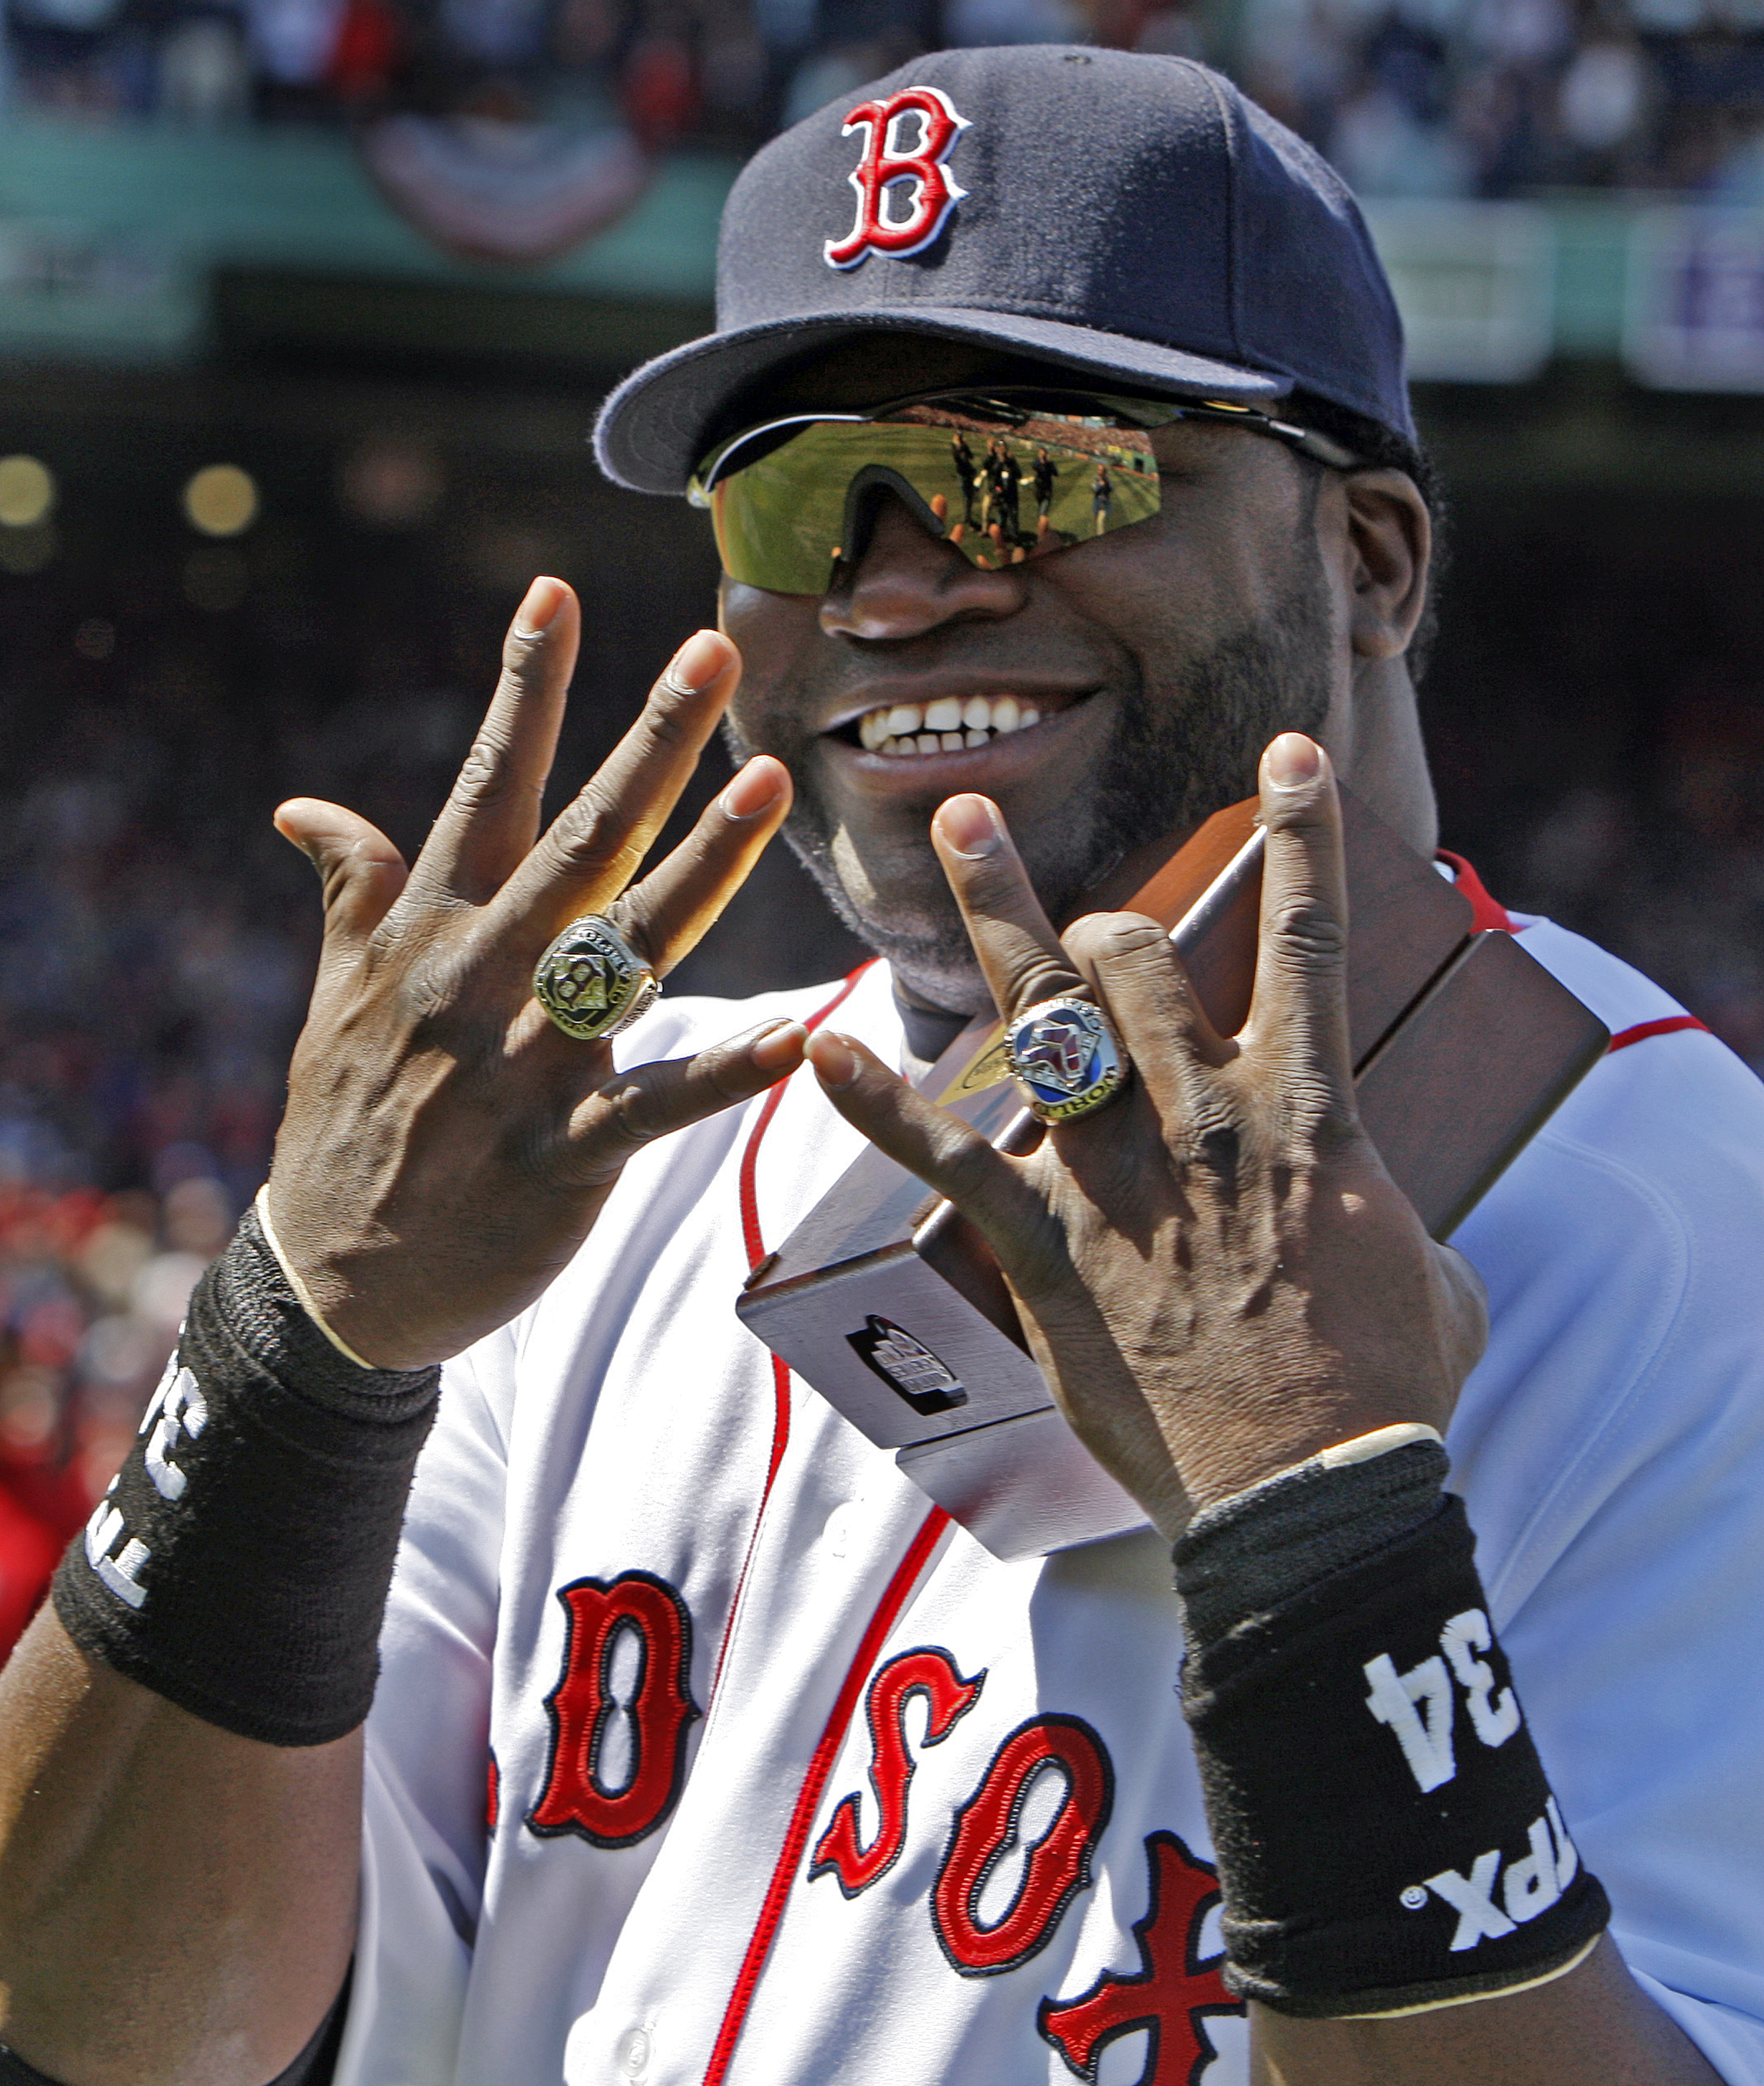 That's two for Ortiz: Red Sox players got their World Series rings ahead of the home opener on April 8 against the Tigers.